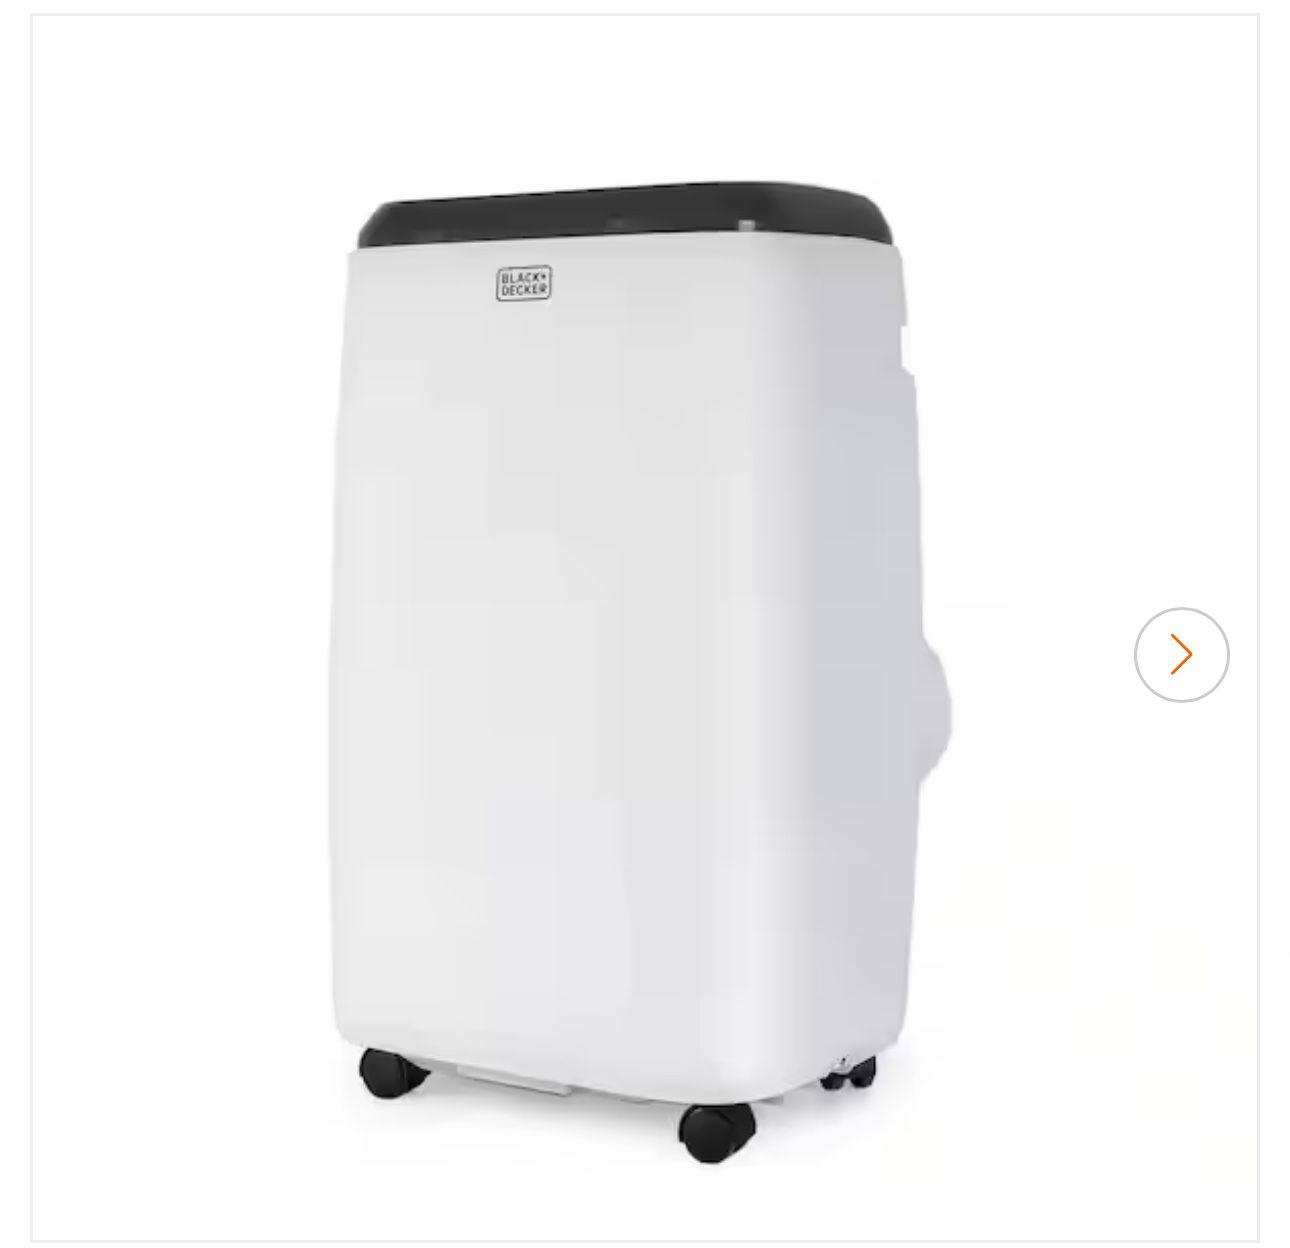 8,000 BTU Portable Air Conditioner Cools 350 Sq. Ft. with Heater and Dehumidifier in White